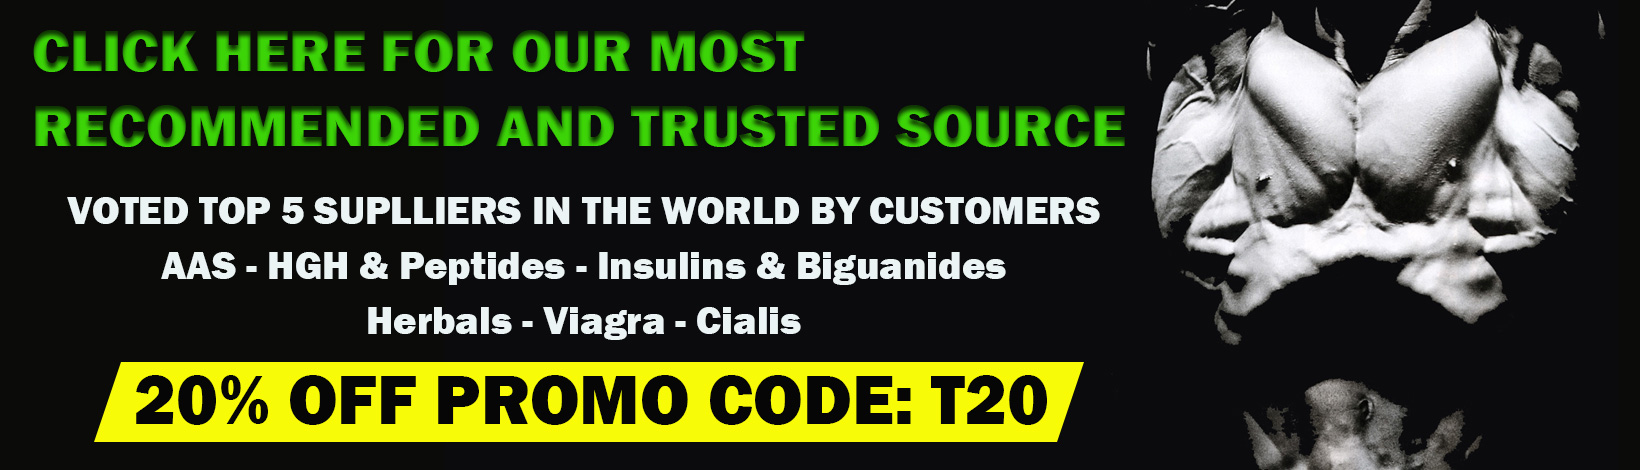 TRUSTED-SOURCE-LINK-INSERT